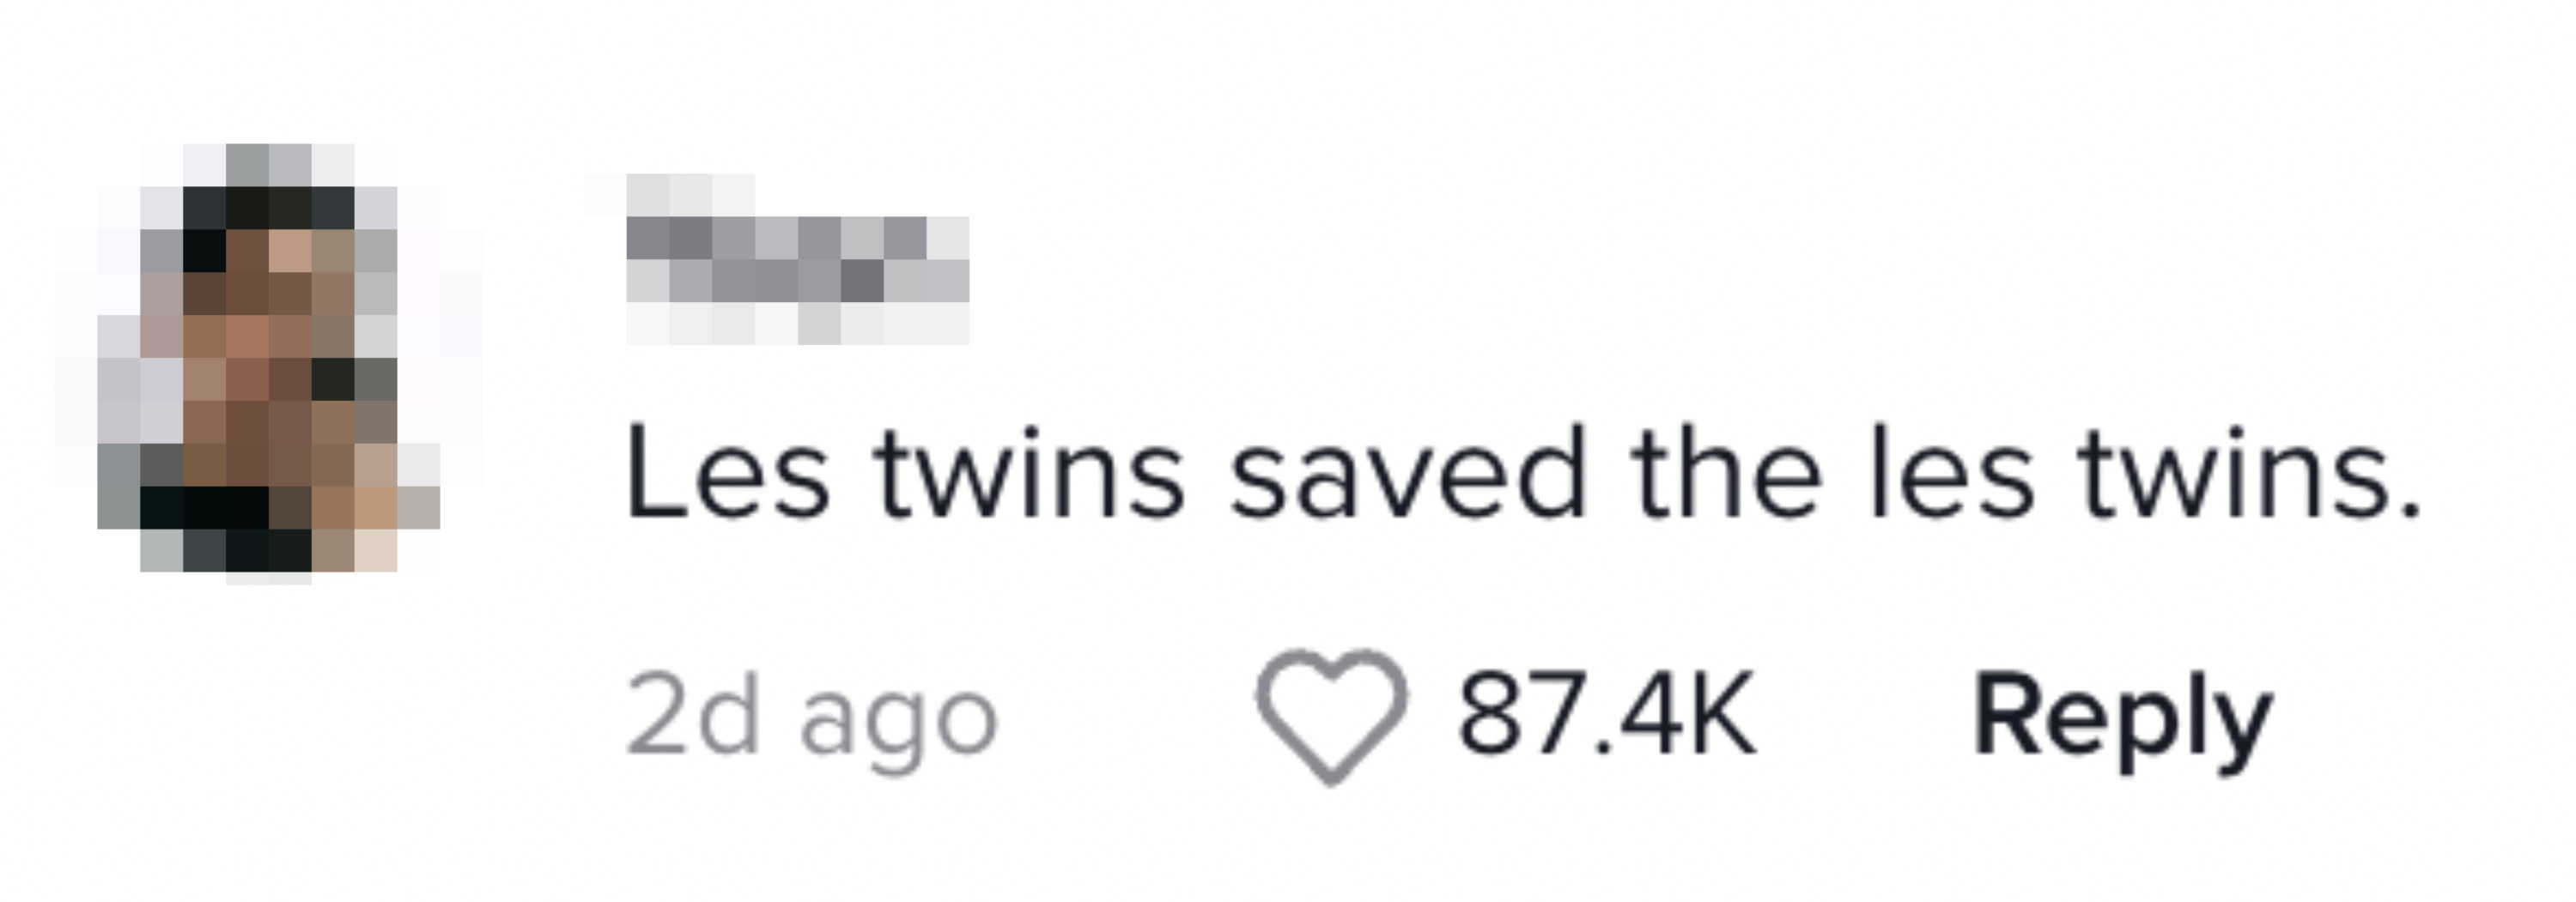 Les twins saved the les twins.